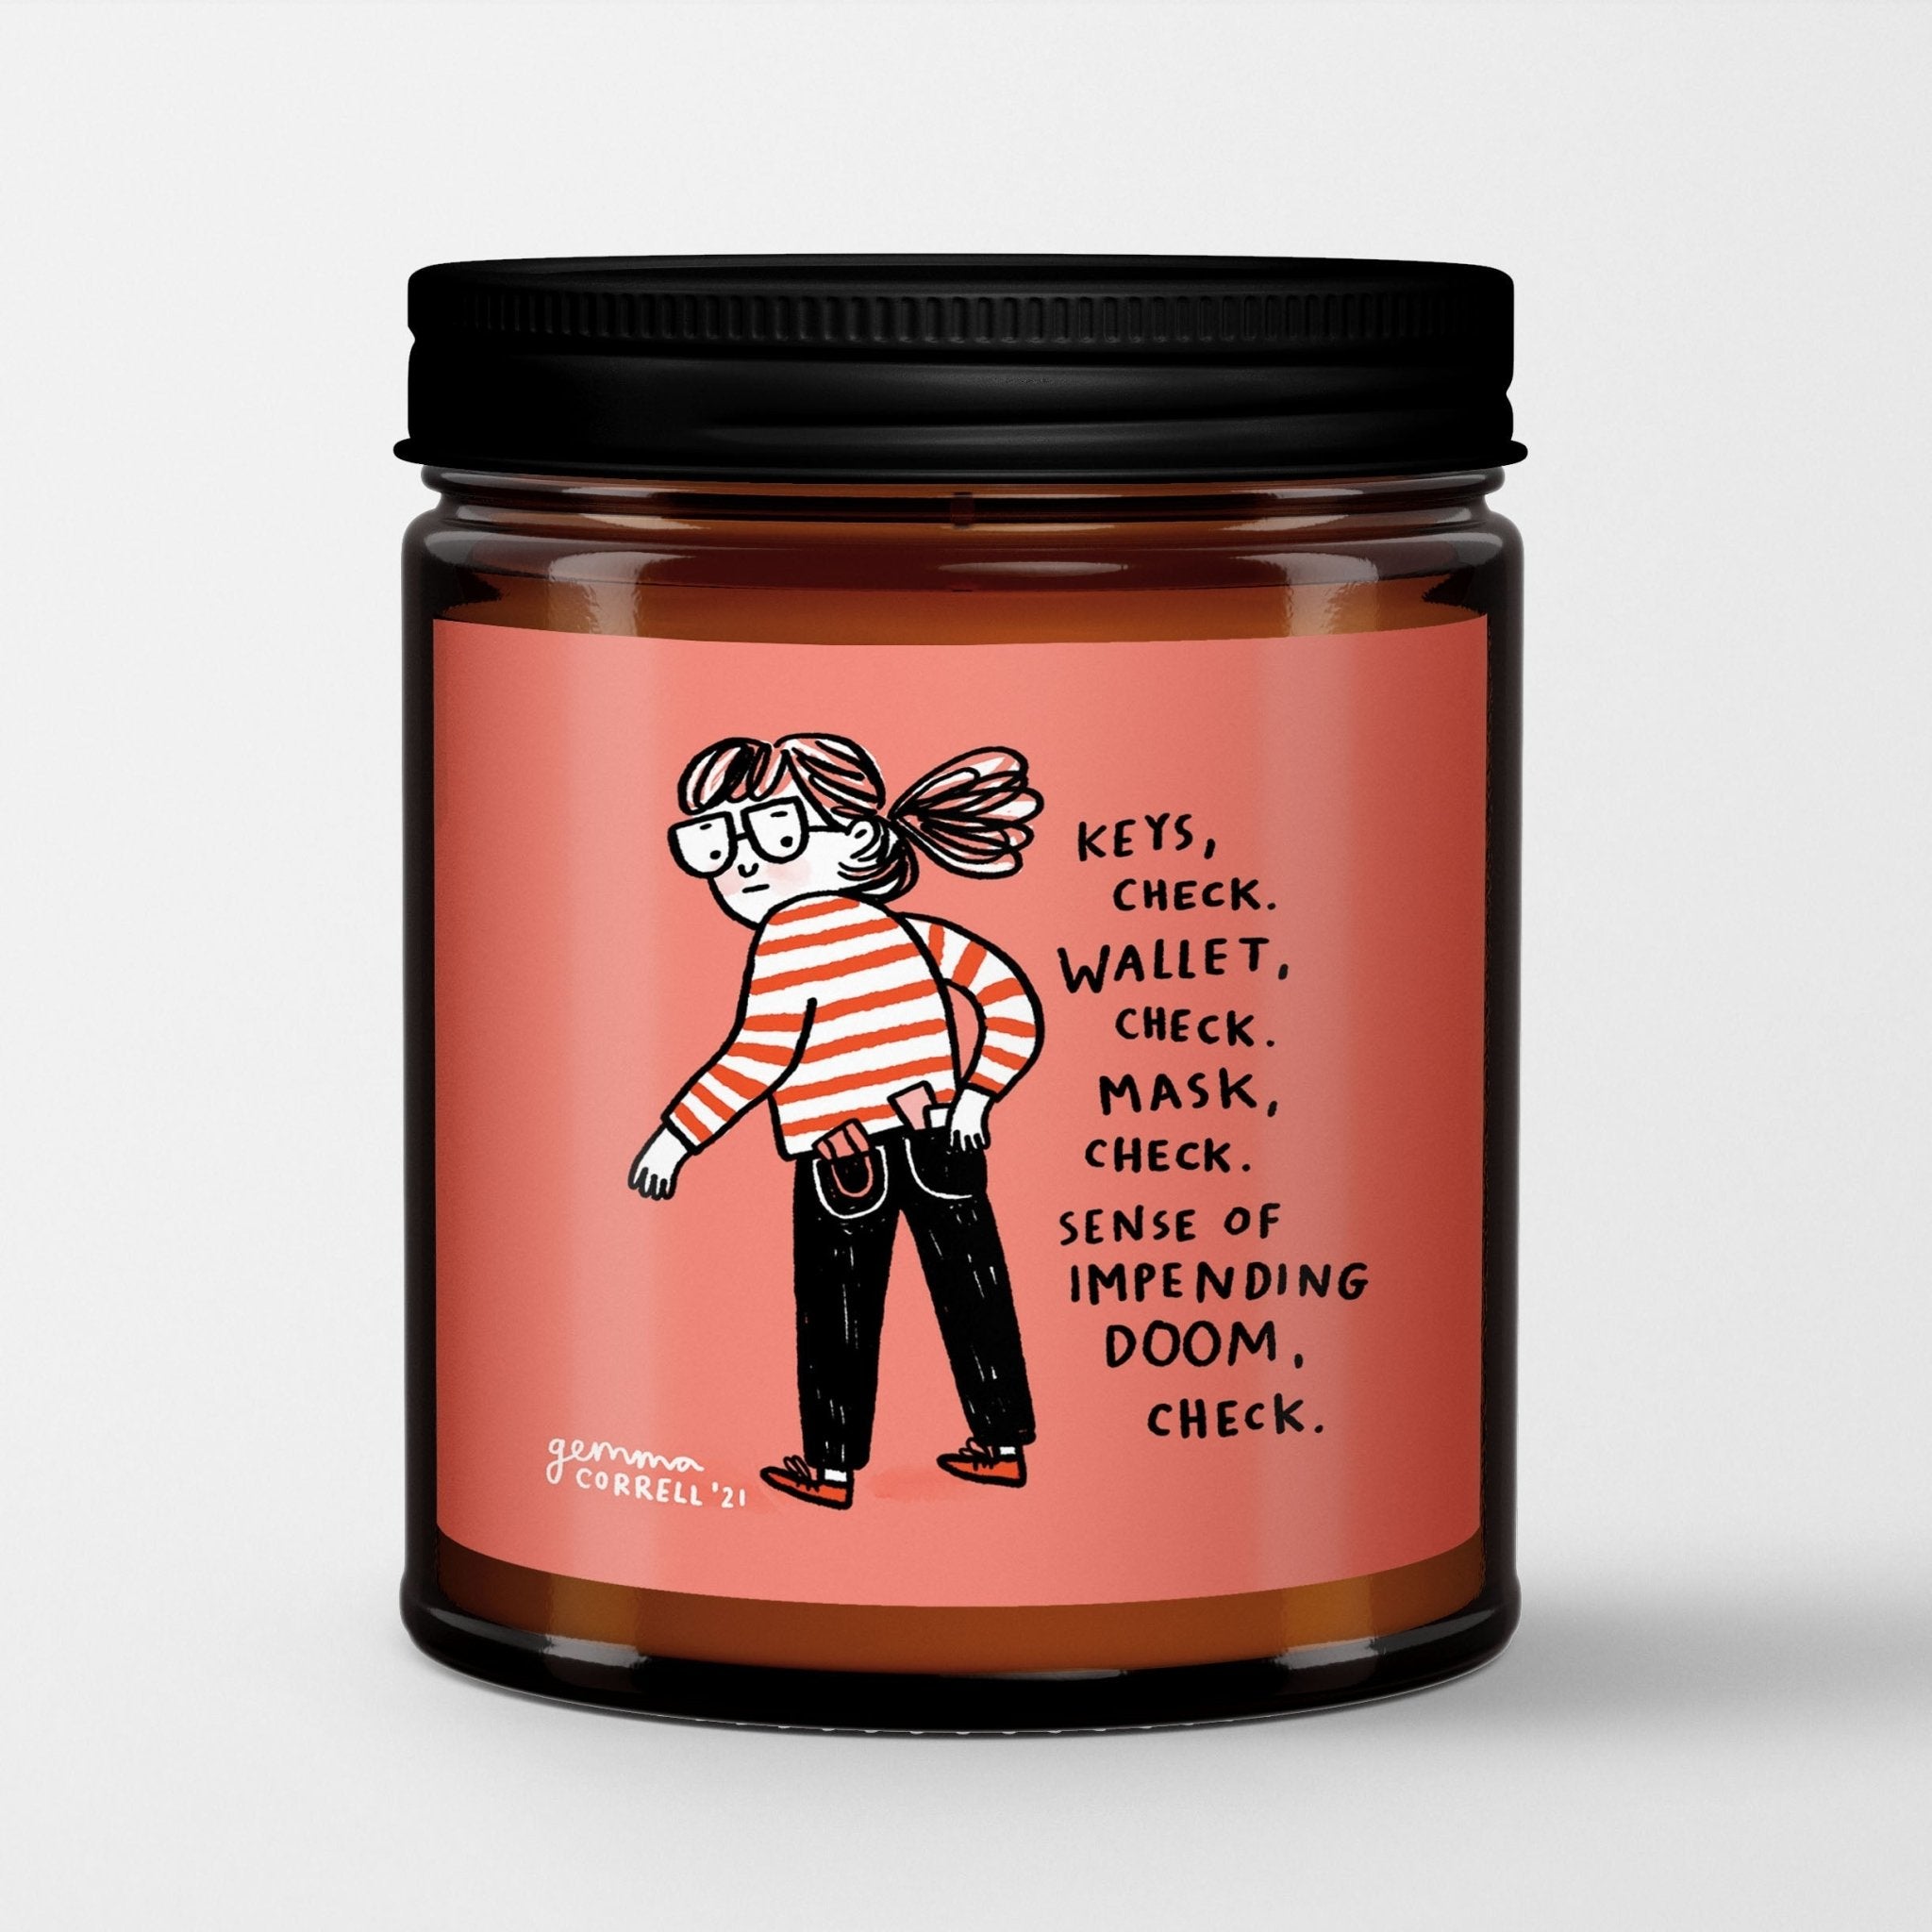 Gemma Correll Scented Candle in Amber Glass Jar: Doom - Candlefy